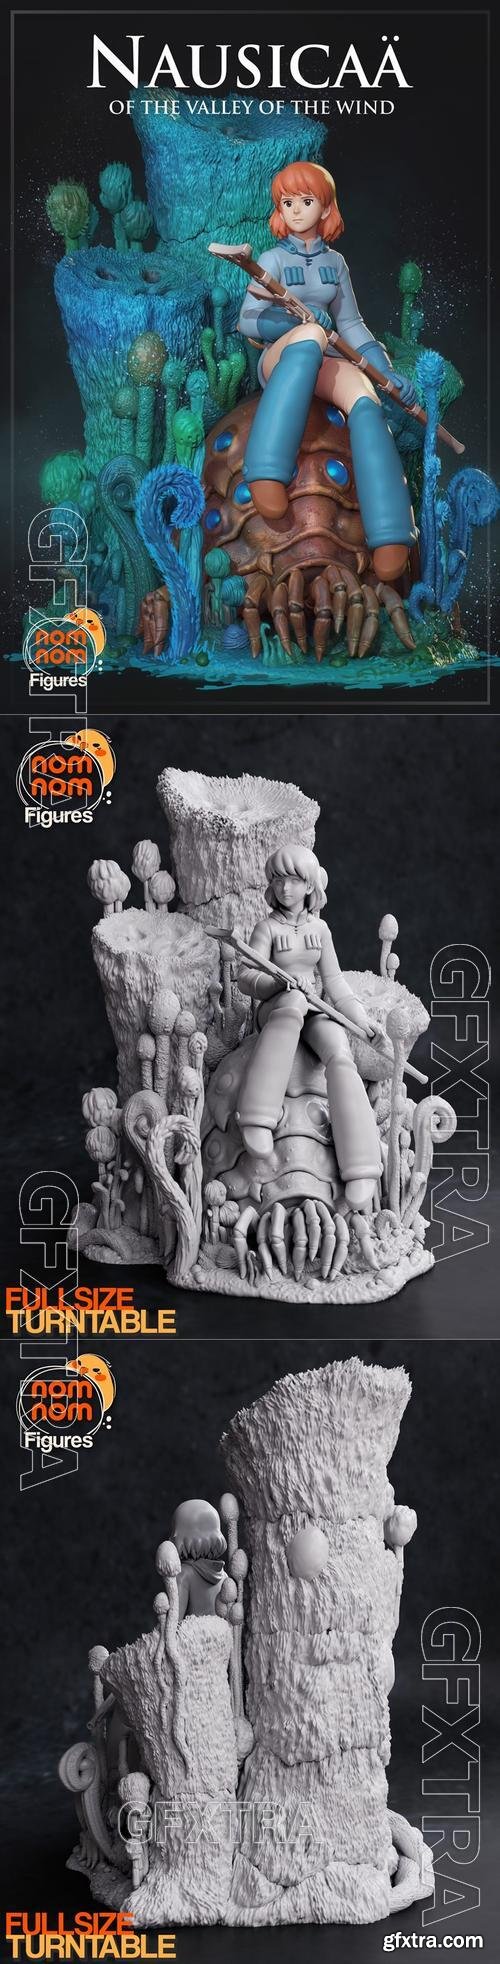 Nomnom Figures - Nausica form the Valley of the Wind &ndash; 3D Print Model